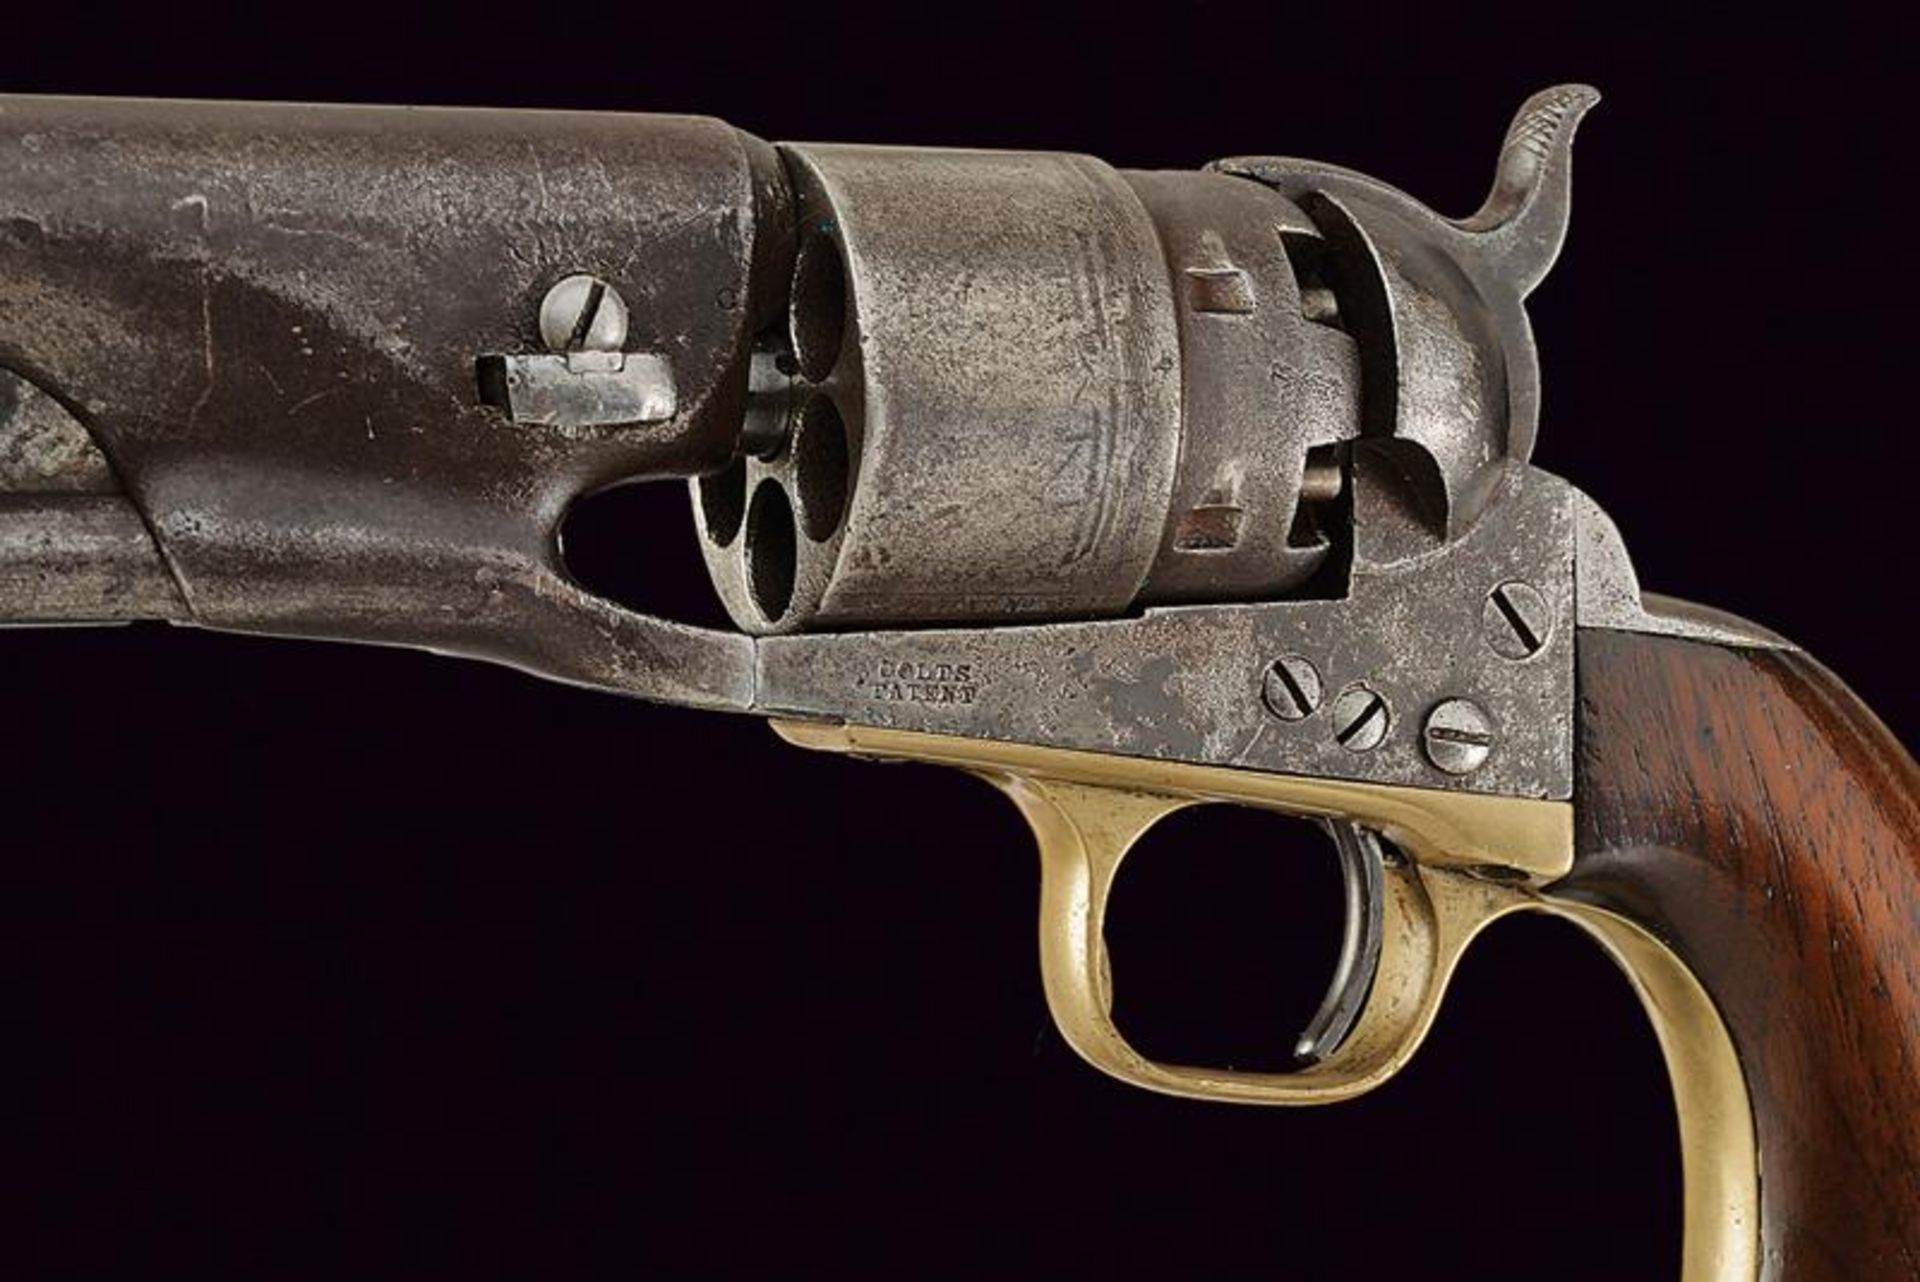 A 1860 Colt Model Army Revolver - Image 3 of 5